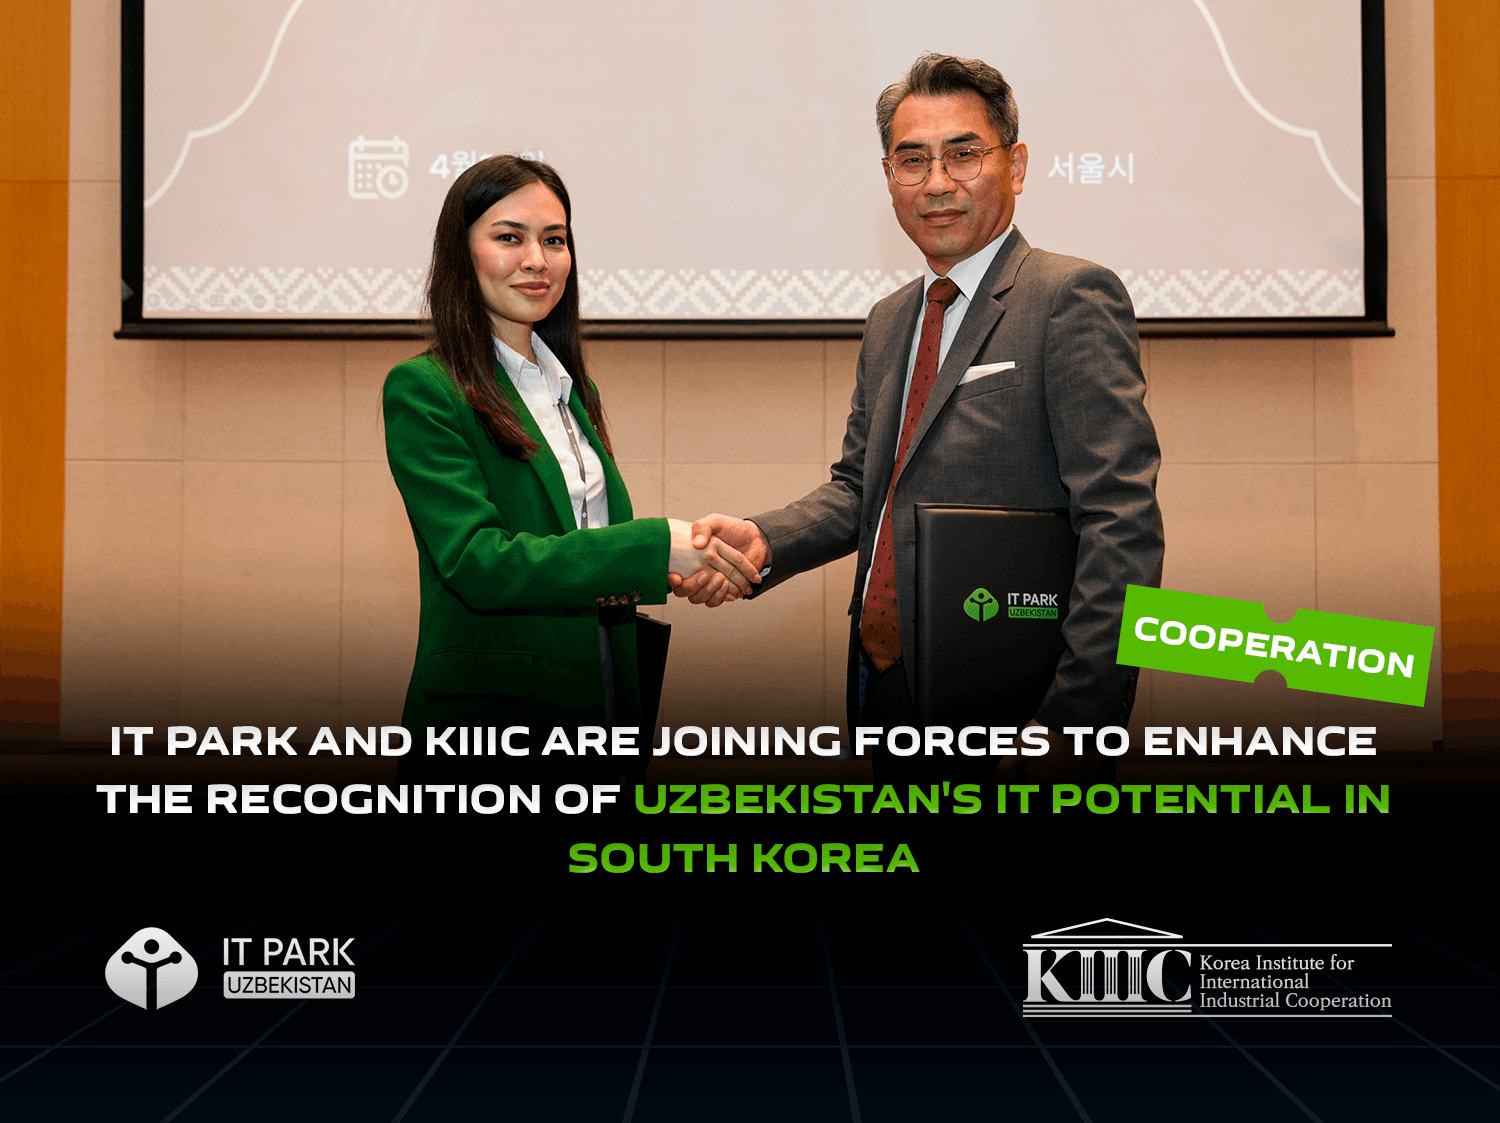 IT Park and KIIIC are joining forces to enhance the recognition of Uzbekistan's IT potential in South Korea